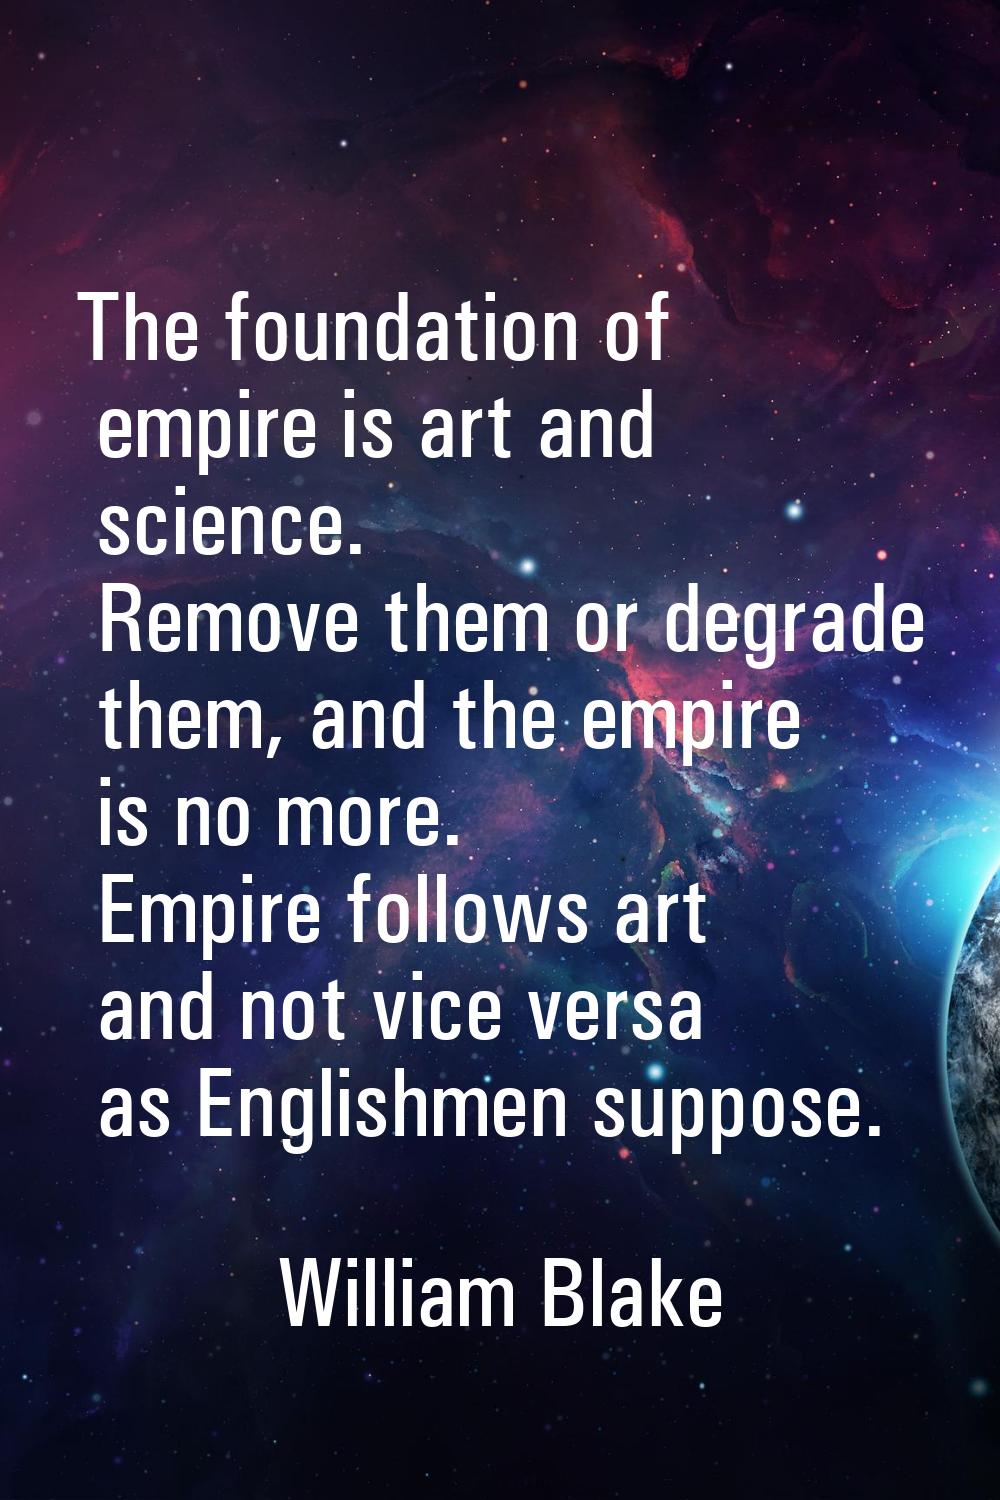 The foundation of empire is art and science. Remove them or degrade them, and the empire is no more